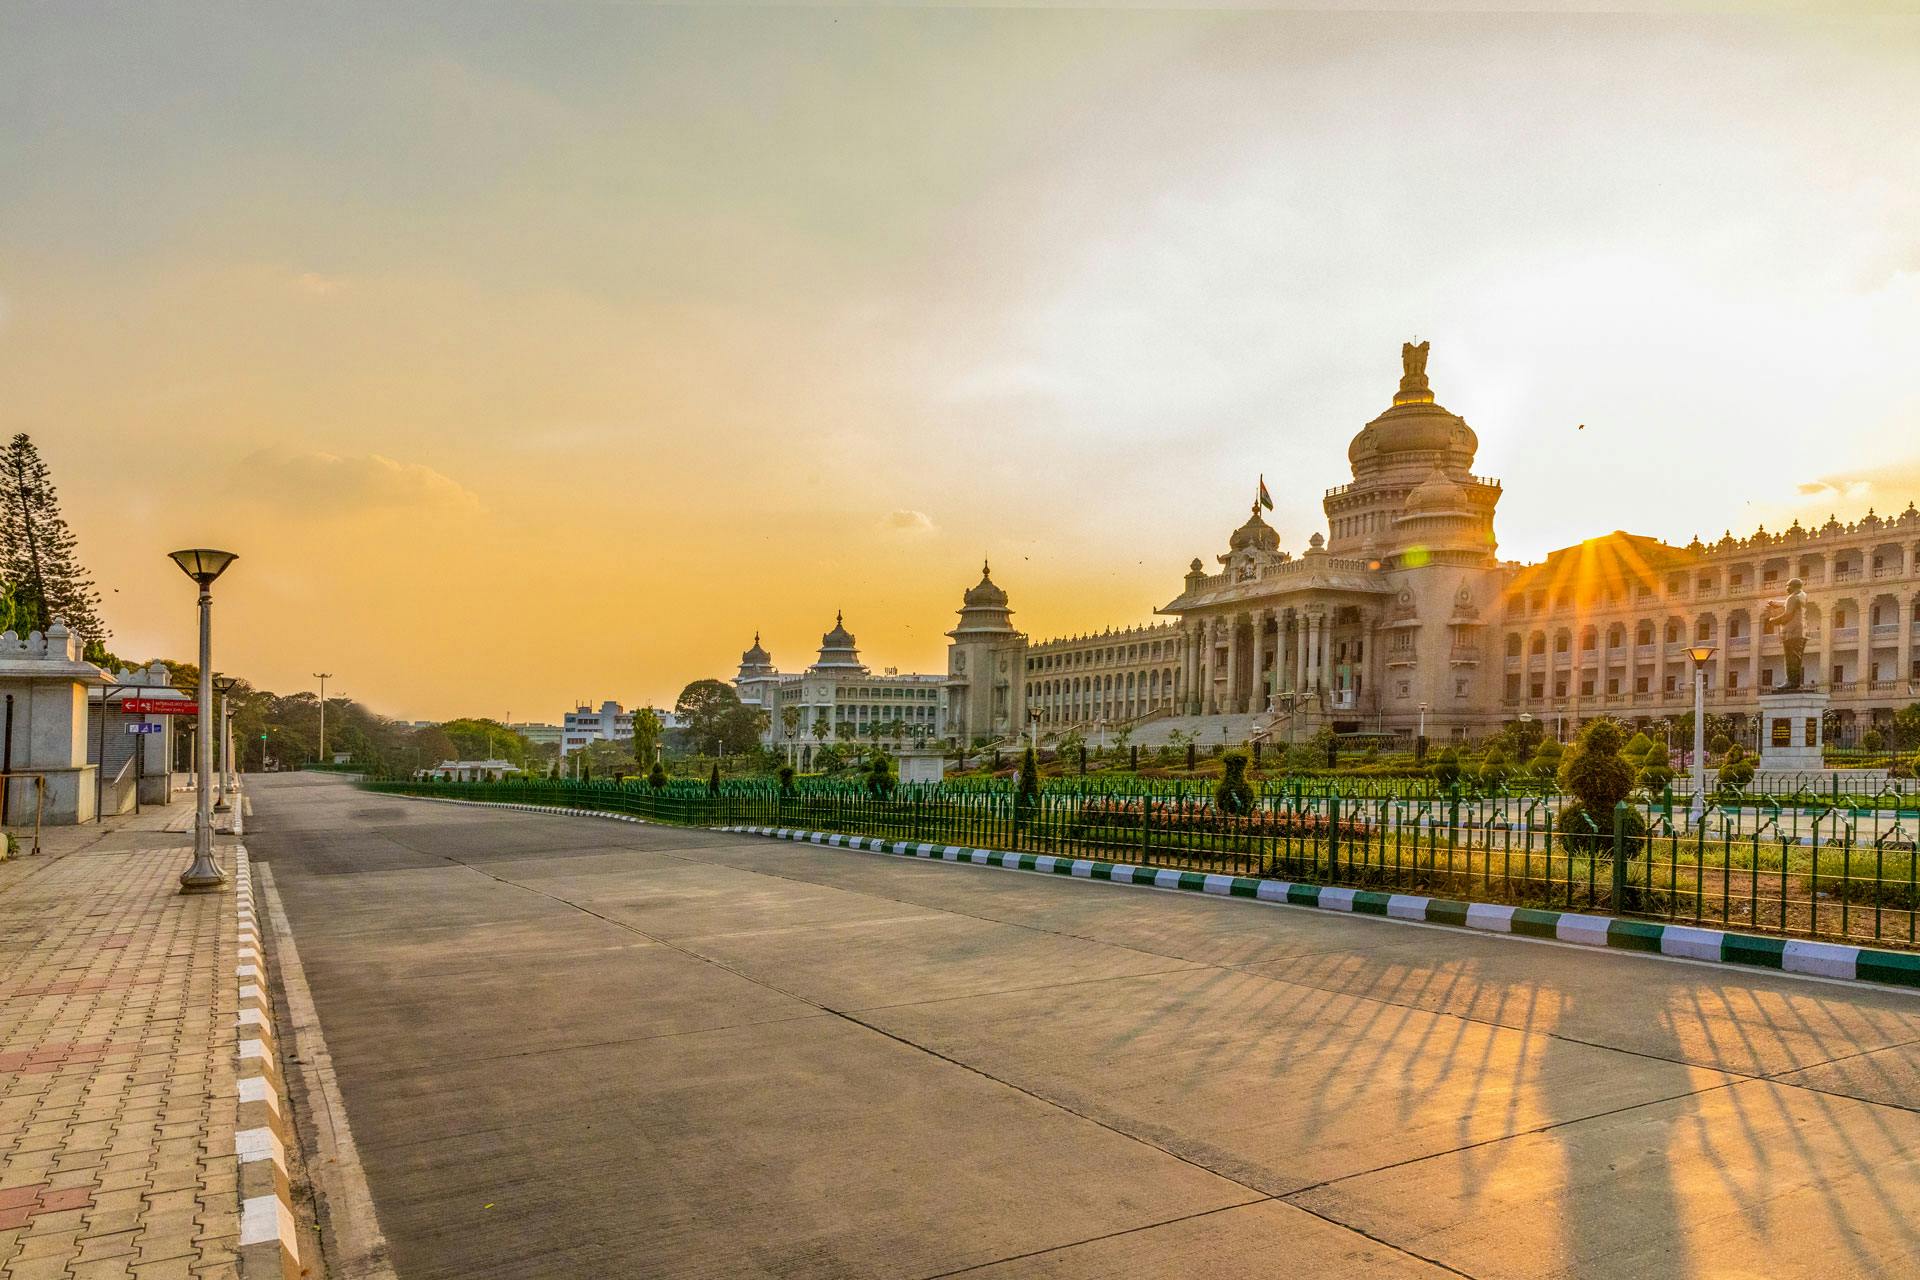 Vidhan Soudha Building in Bangalore, with the sun setting in the background